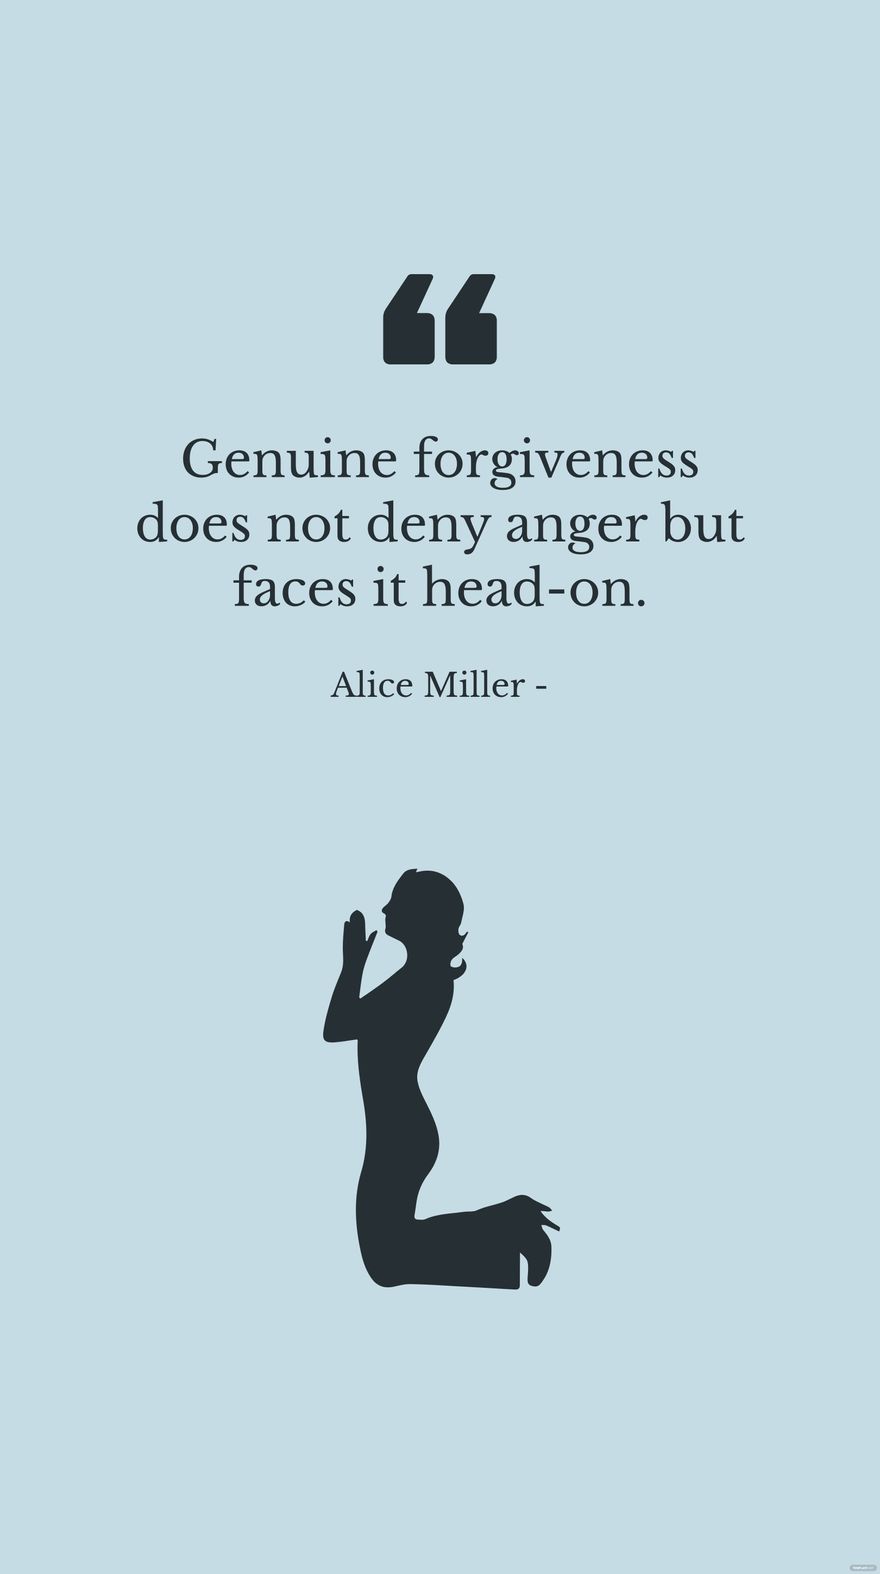 Alice Miller - Genuine forgiveness does not deny anger but faces it head-on.